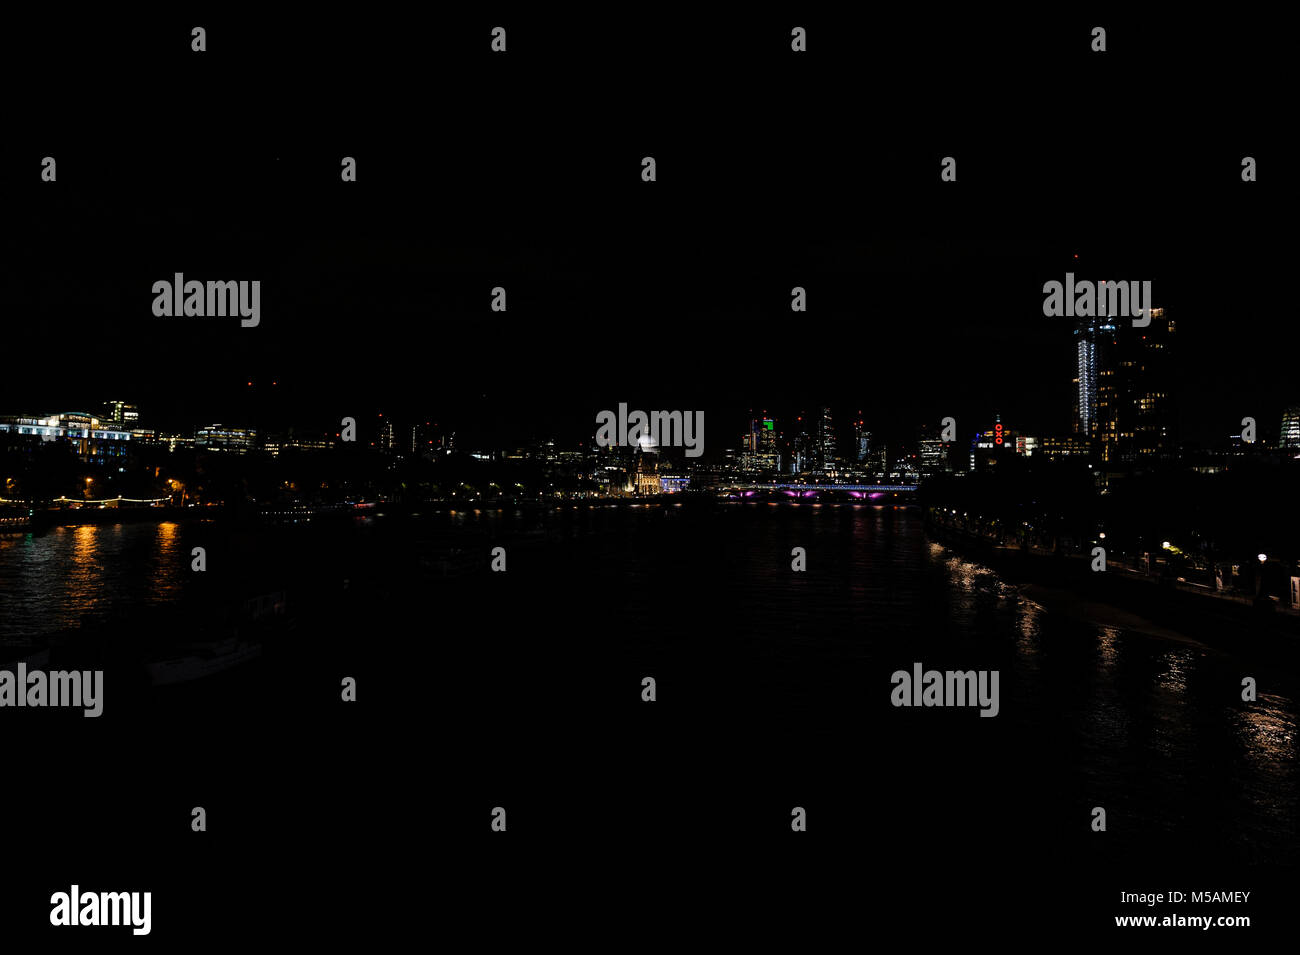 London, wit the dome of st pauls cathedral at night Stock Photo